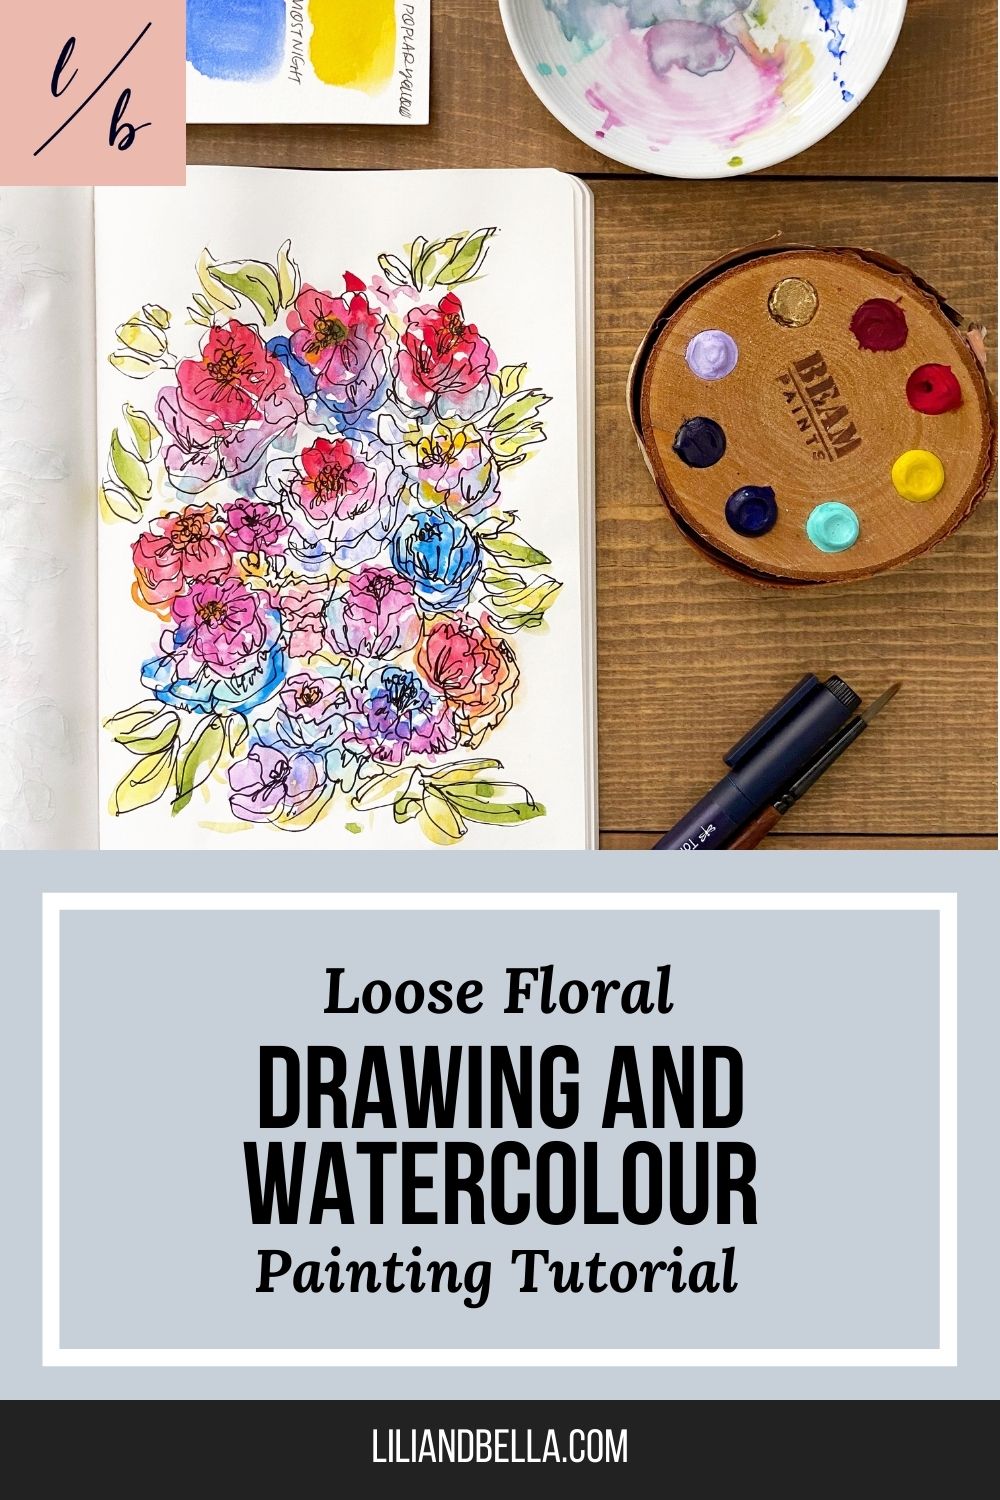 How to Use Watercolour Paint - Simple Guide for Beginners